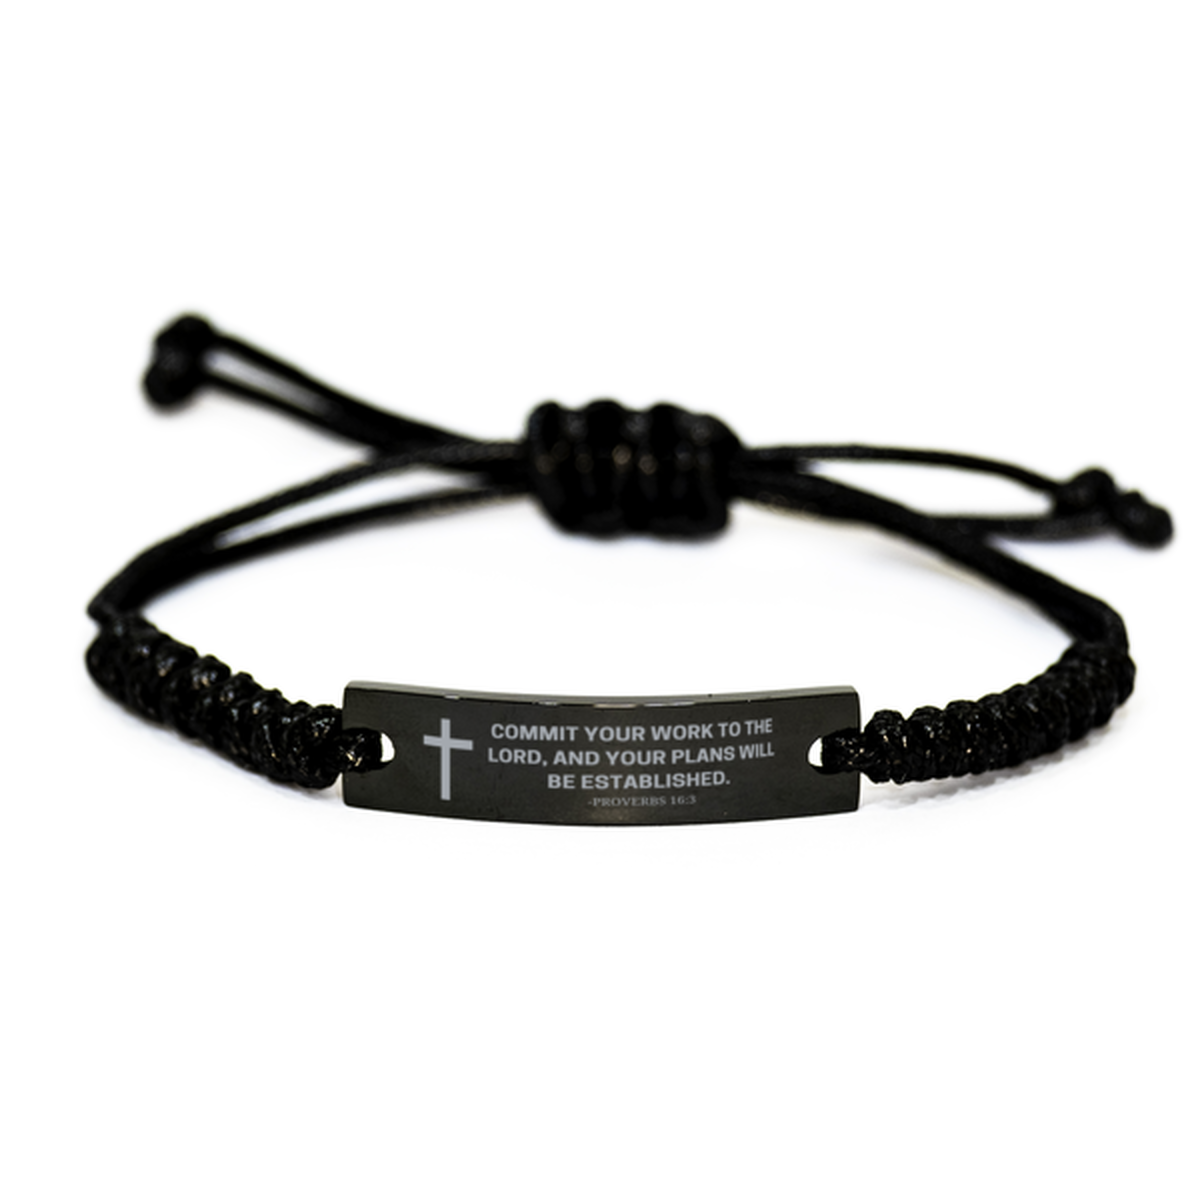 Baptism Gifts For Teenage Boys Girls, Christian Bible Verse Black Rope Bracelet, Commit your work to the Lord, Catholic Confirmation Gifts for Son, Godson, Grandson, Nephew